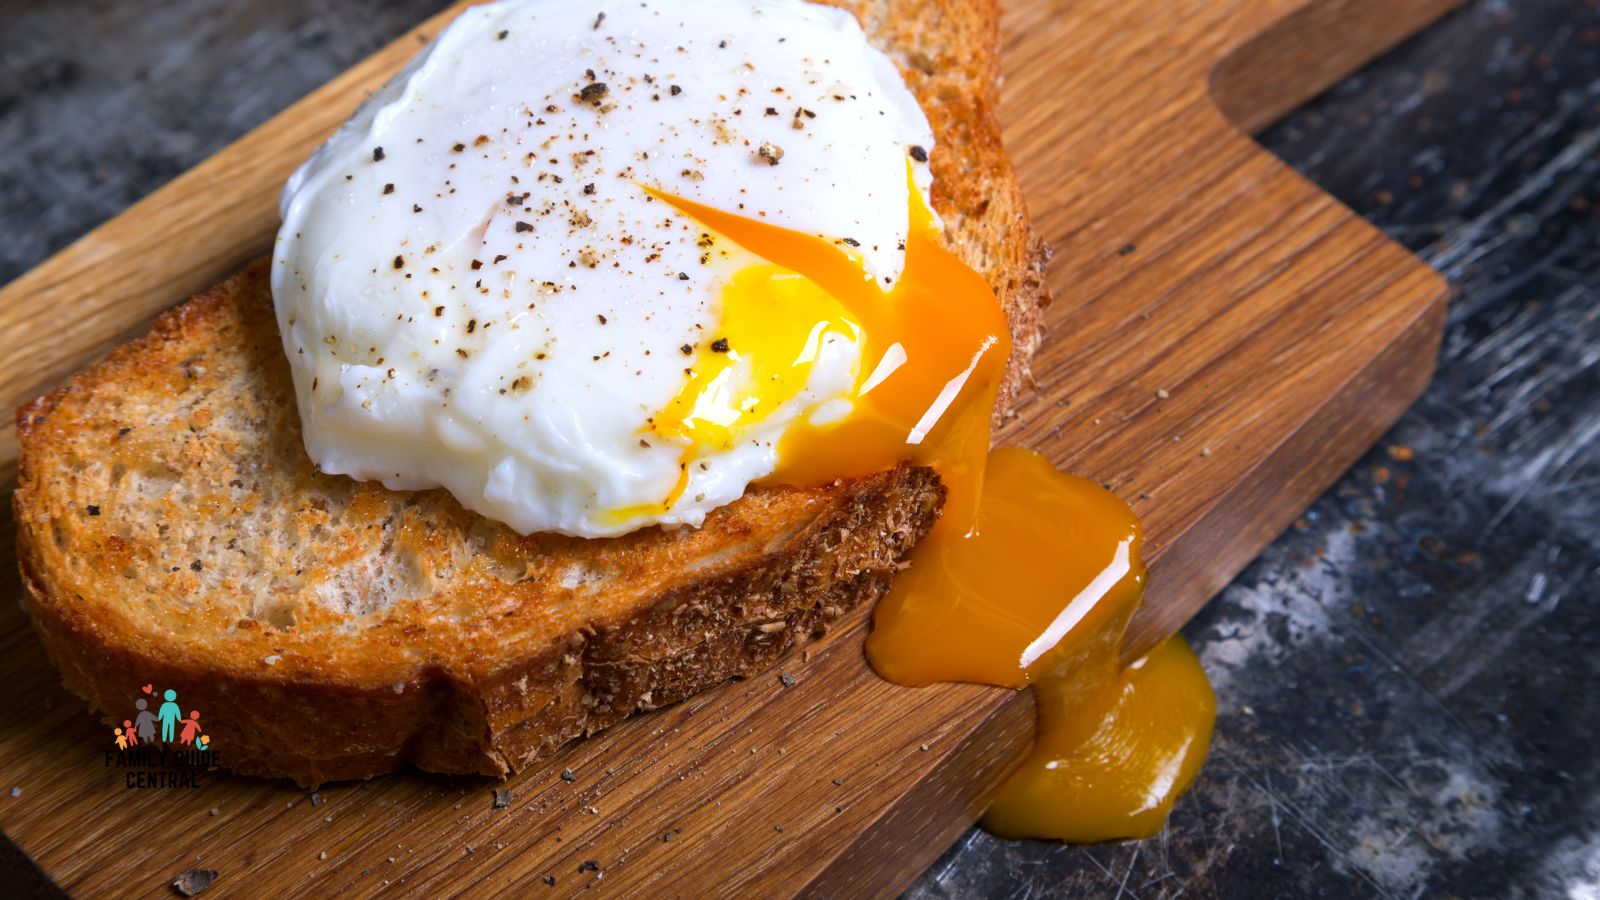 Poached egg on toast - familyguidecentral.com